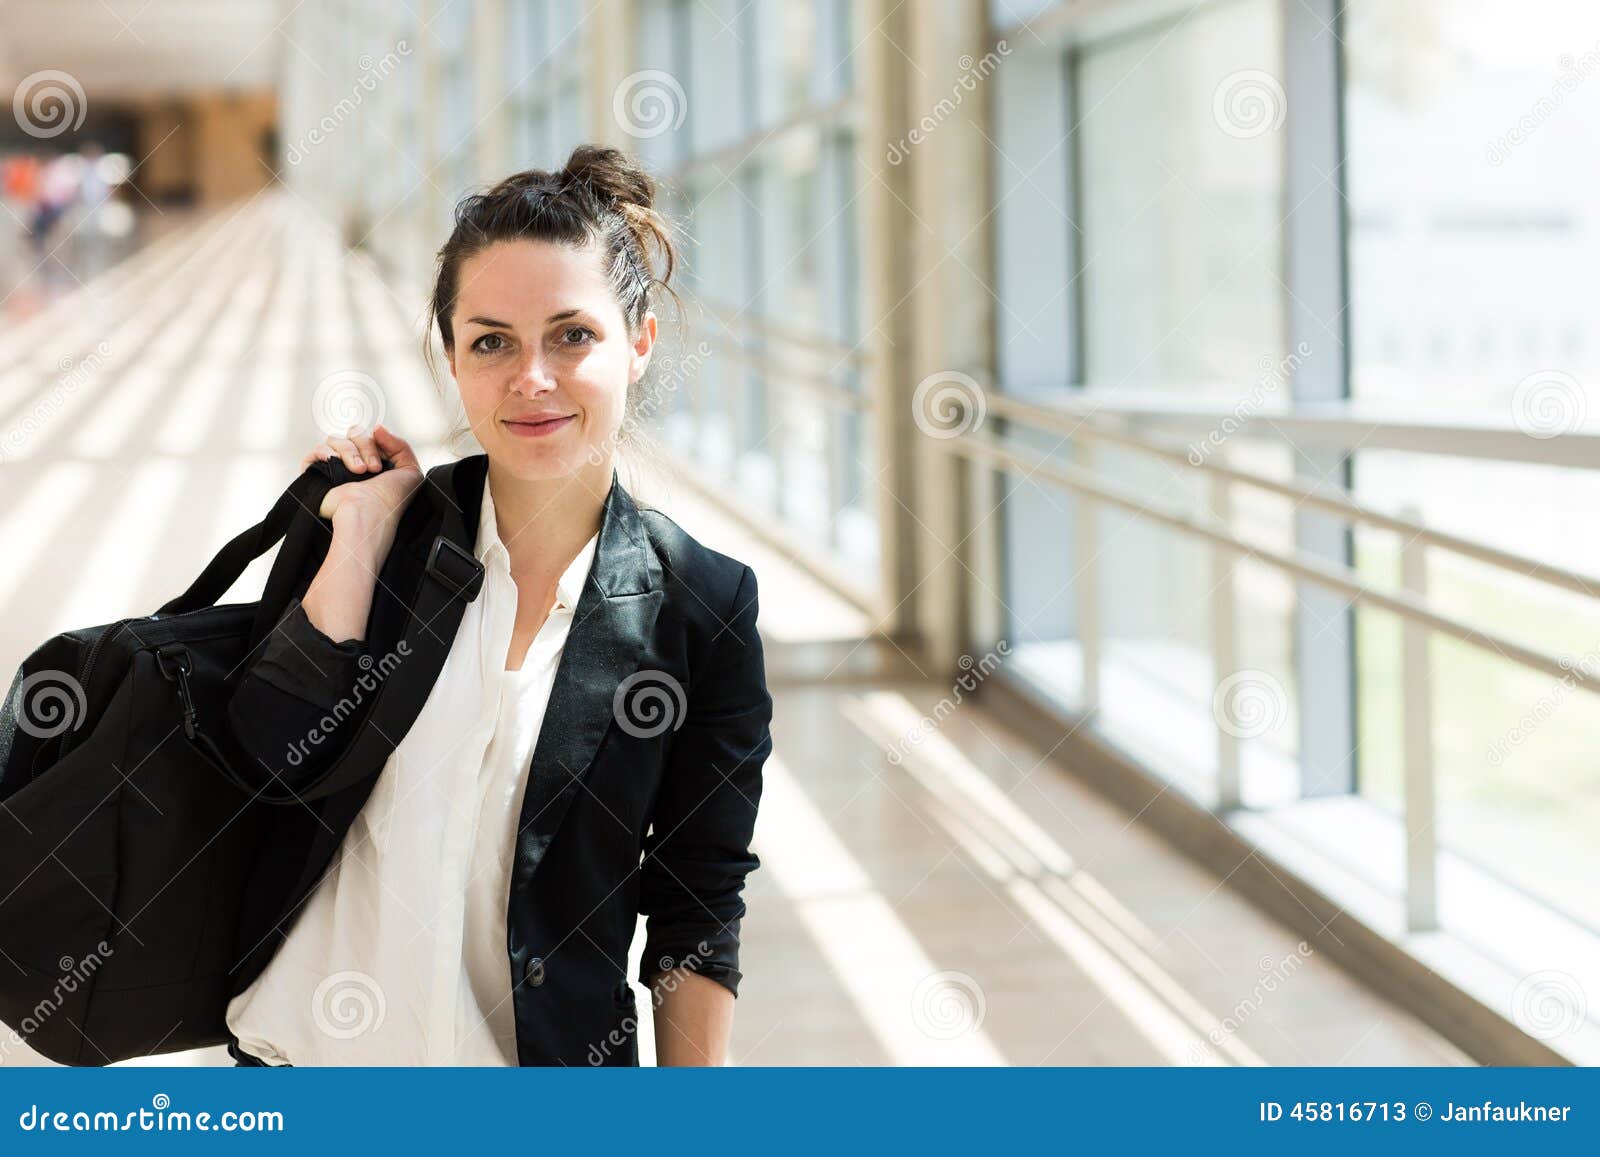 Businesswoman in the Airport Stock Image - Image of girl, businesswoman ...